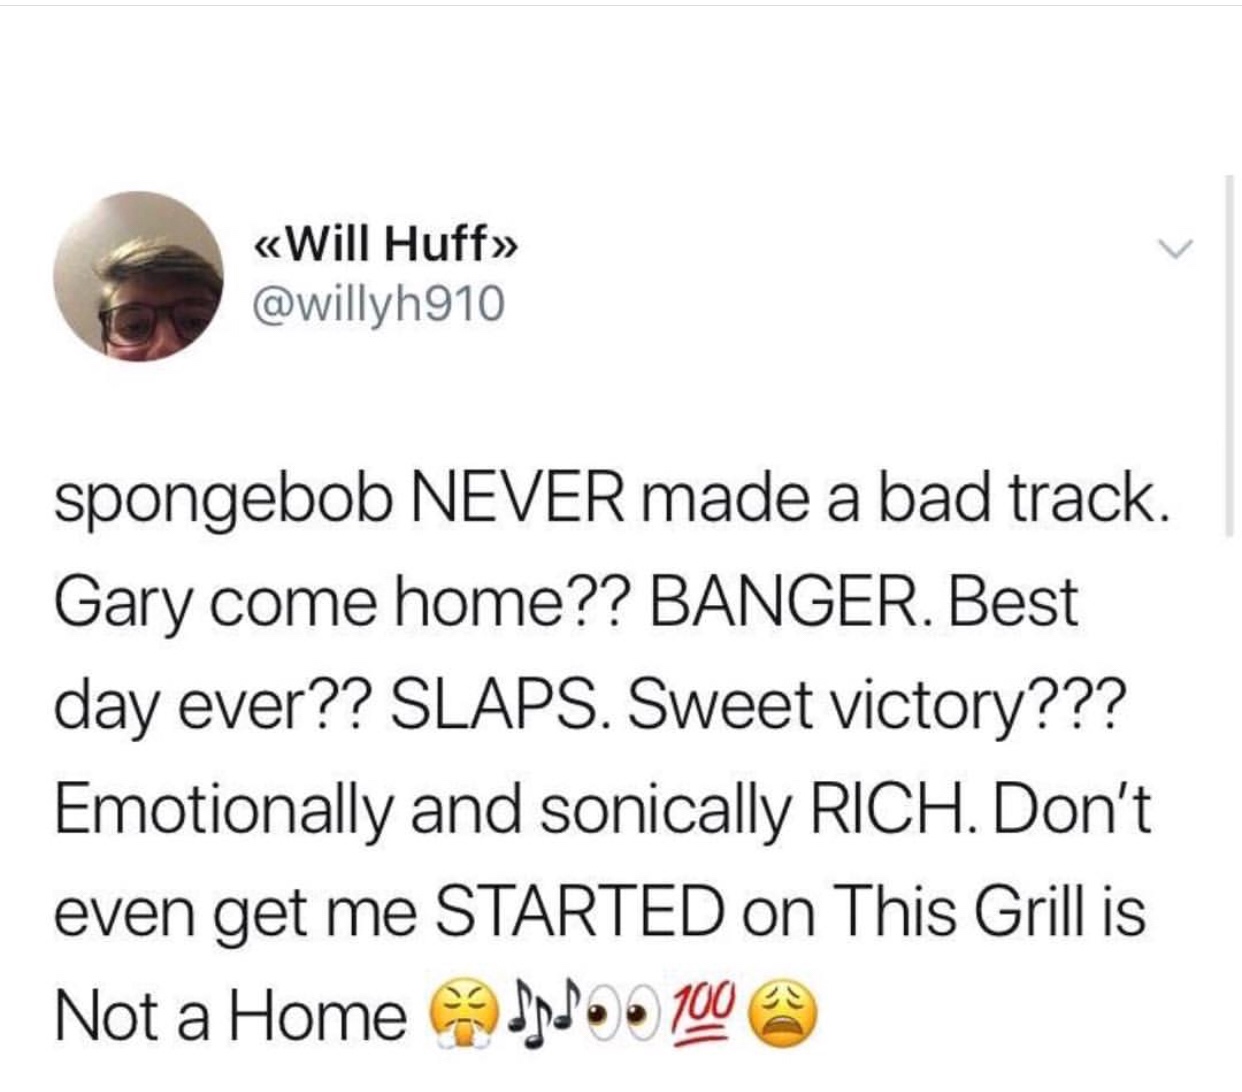 memes - harold they re lesbians - Will Huff spongebob Never made a bad track. Gary come home?? Banger. Best day ever?? Slaps. Sweet victory??? Emotionally and sonically Rich. Don't even get me Started on This Grill is Not a Home Ind. 100